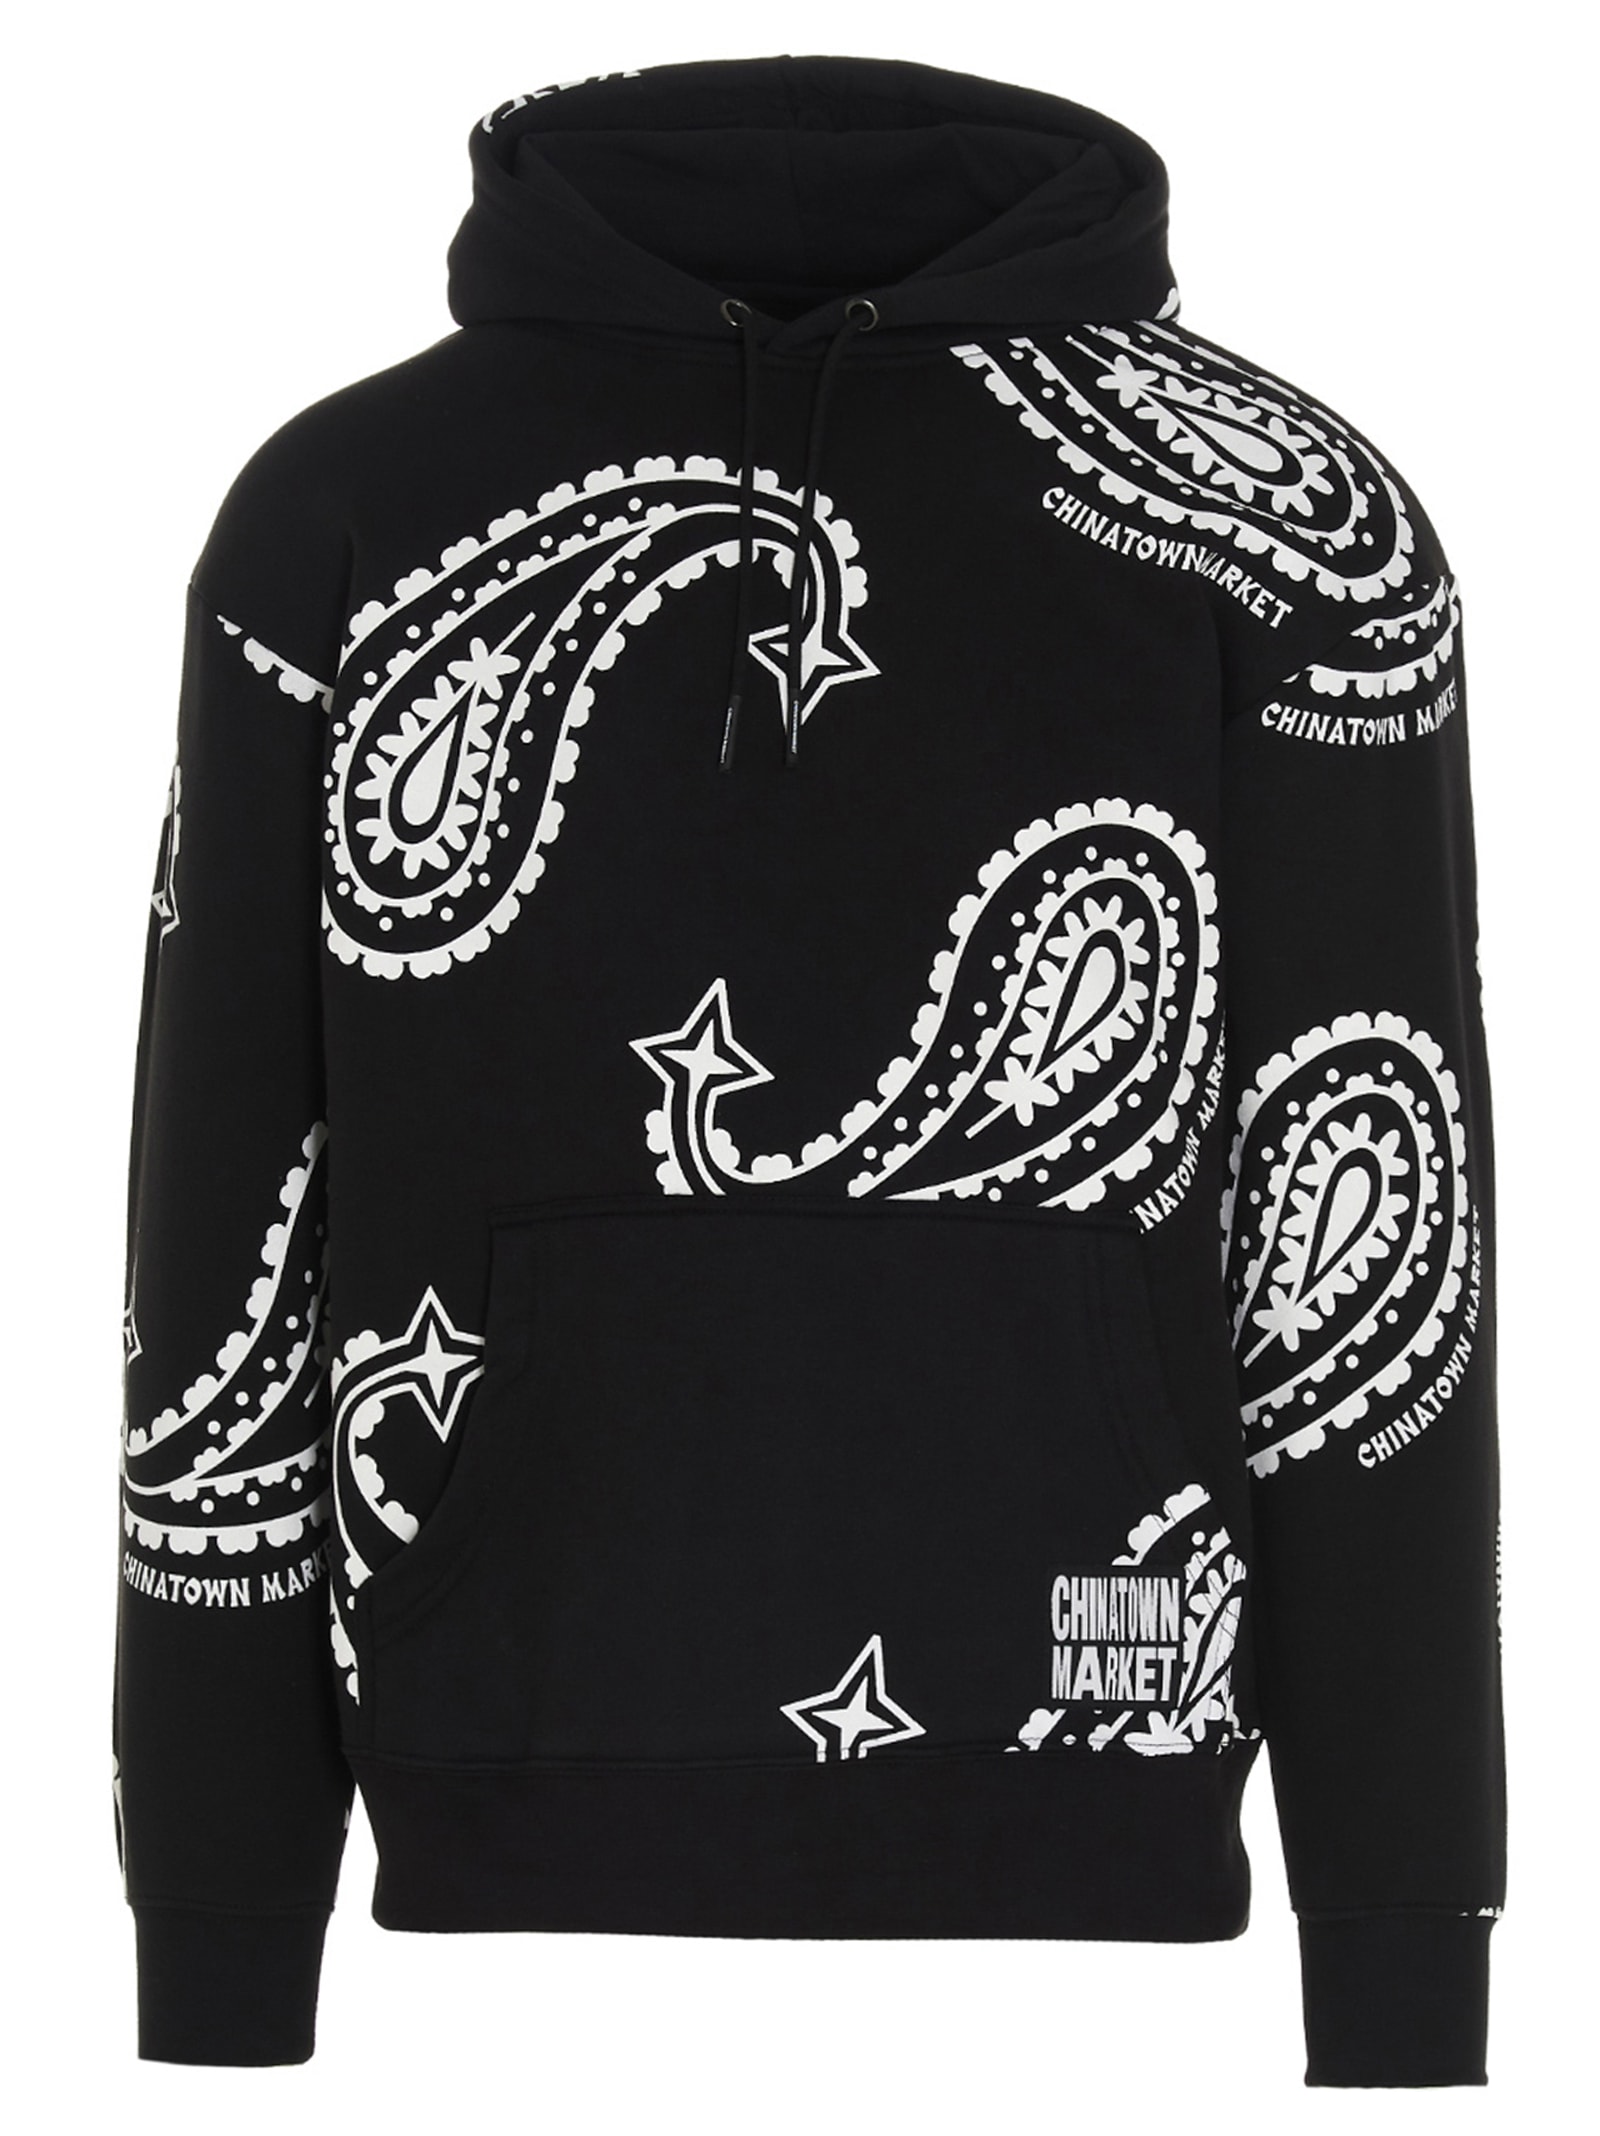 Chinatown Market Capsule Paisley Collab. yg / 4hunnid Sweater